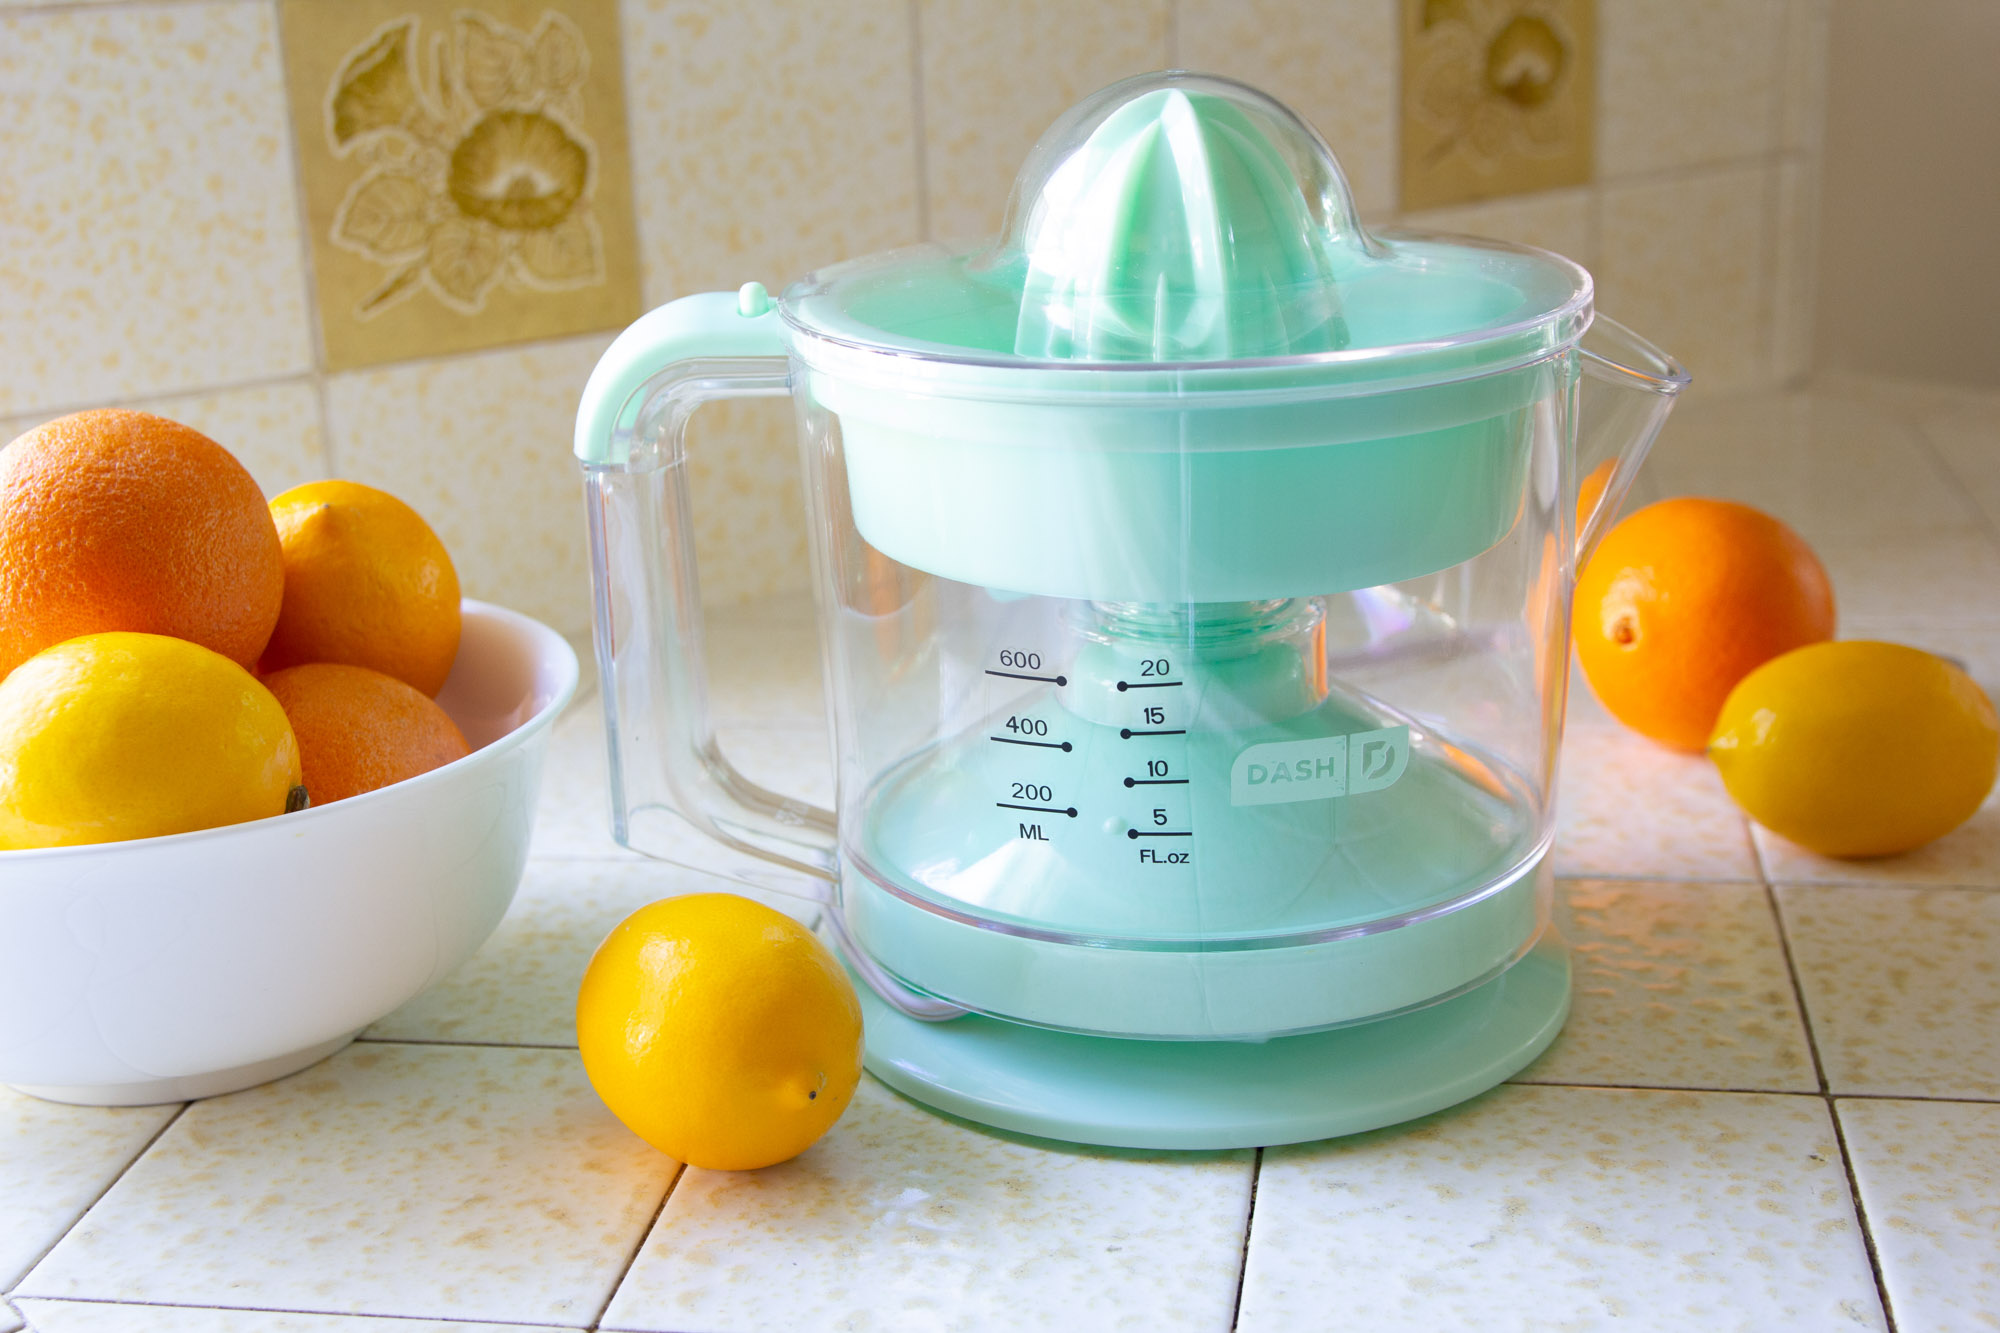 Green Paffenery Luxury Citrus Juicer Hand Squeezer Grapefruit & Other Citrus Fruit Manual Juice Press Easy Pour Spout Limes Good Grip Healthy Manual Juicer with Measuring Cup and Grater Oranges 